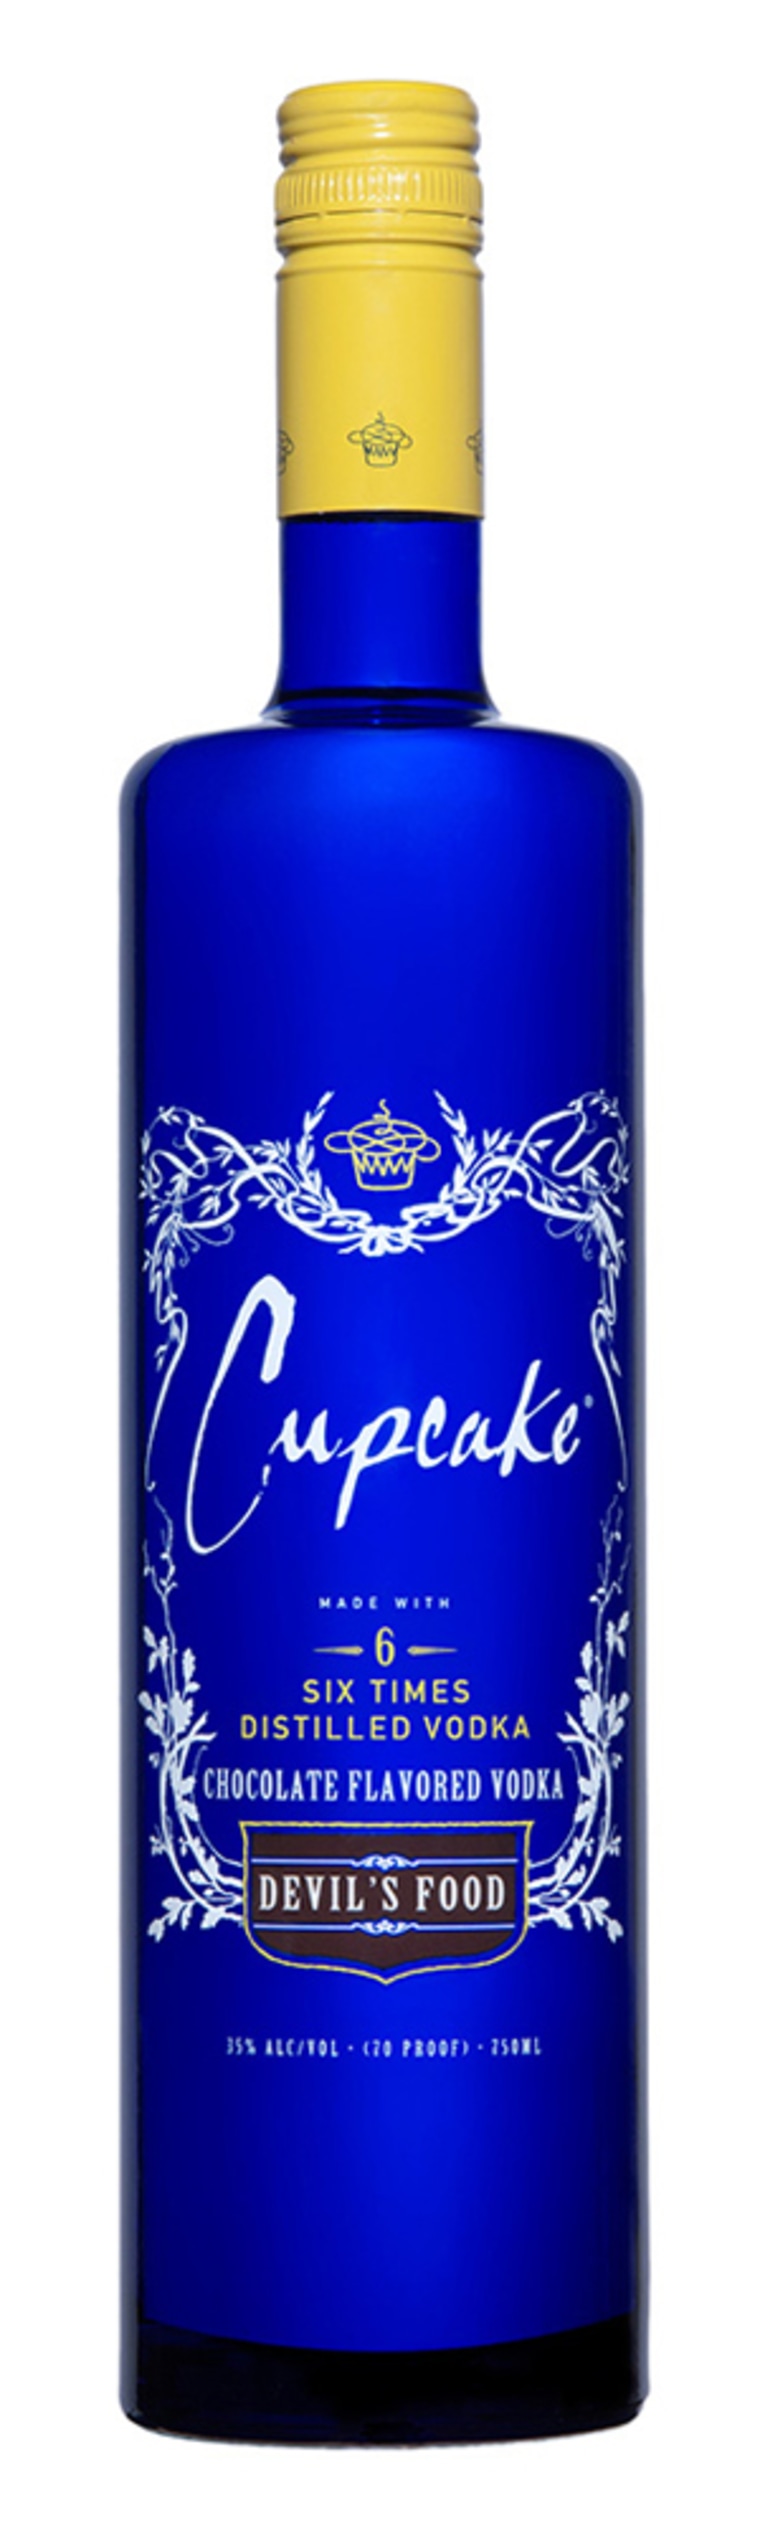 Cupcakes & Vodka Brand The Holy Grail Dramatic Sleeve Off The